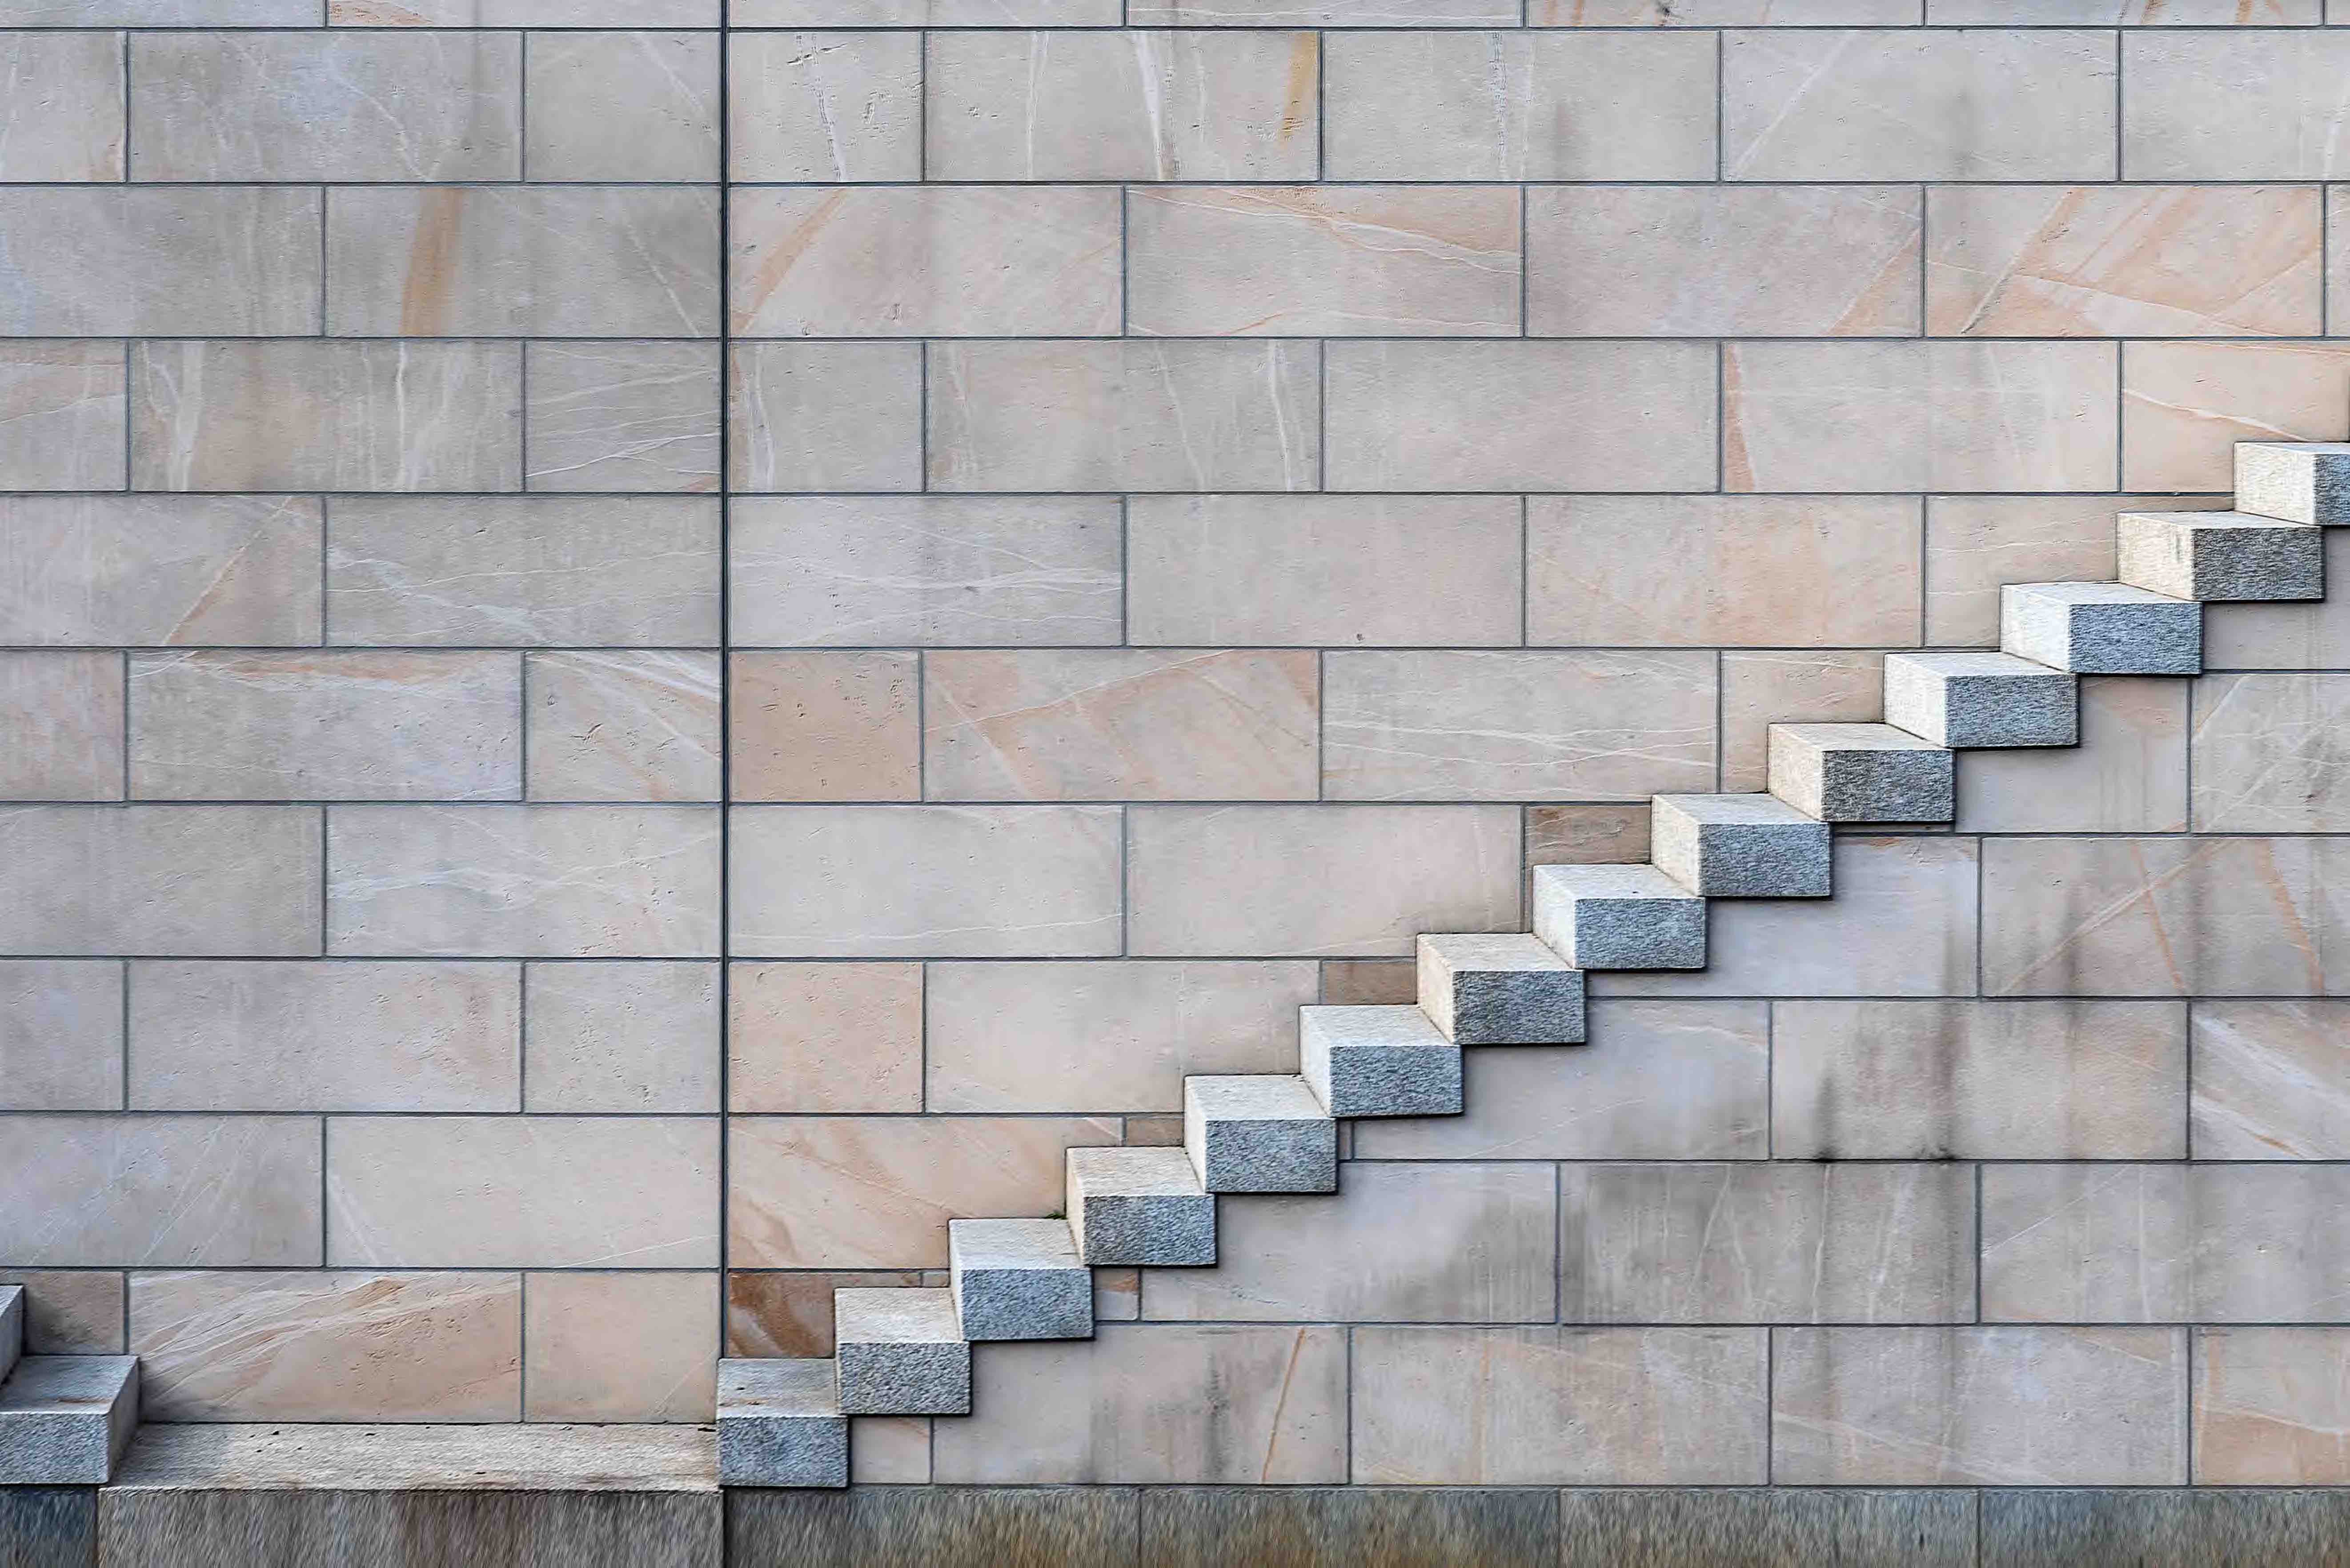 A set of granite stairs set agains a background of multicolored stone tiles